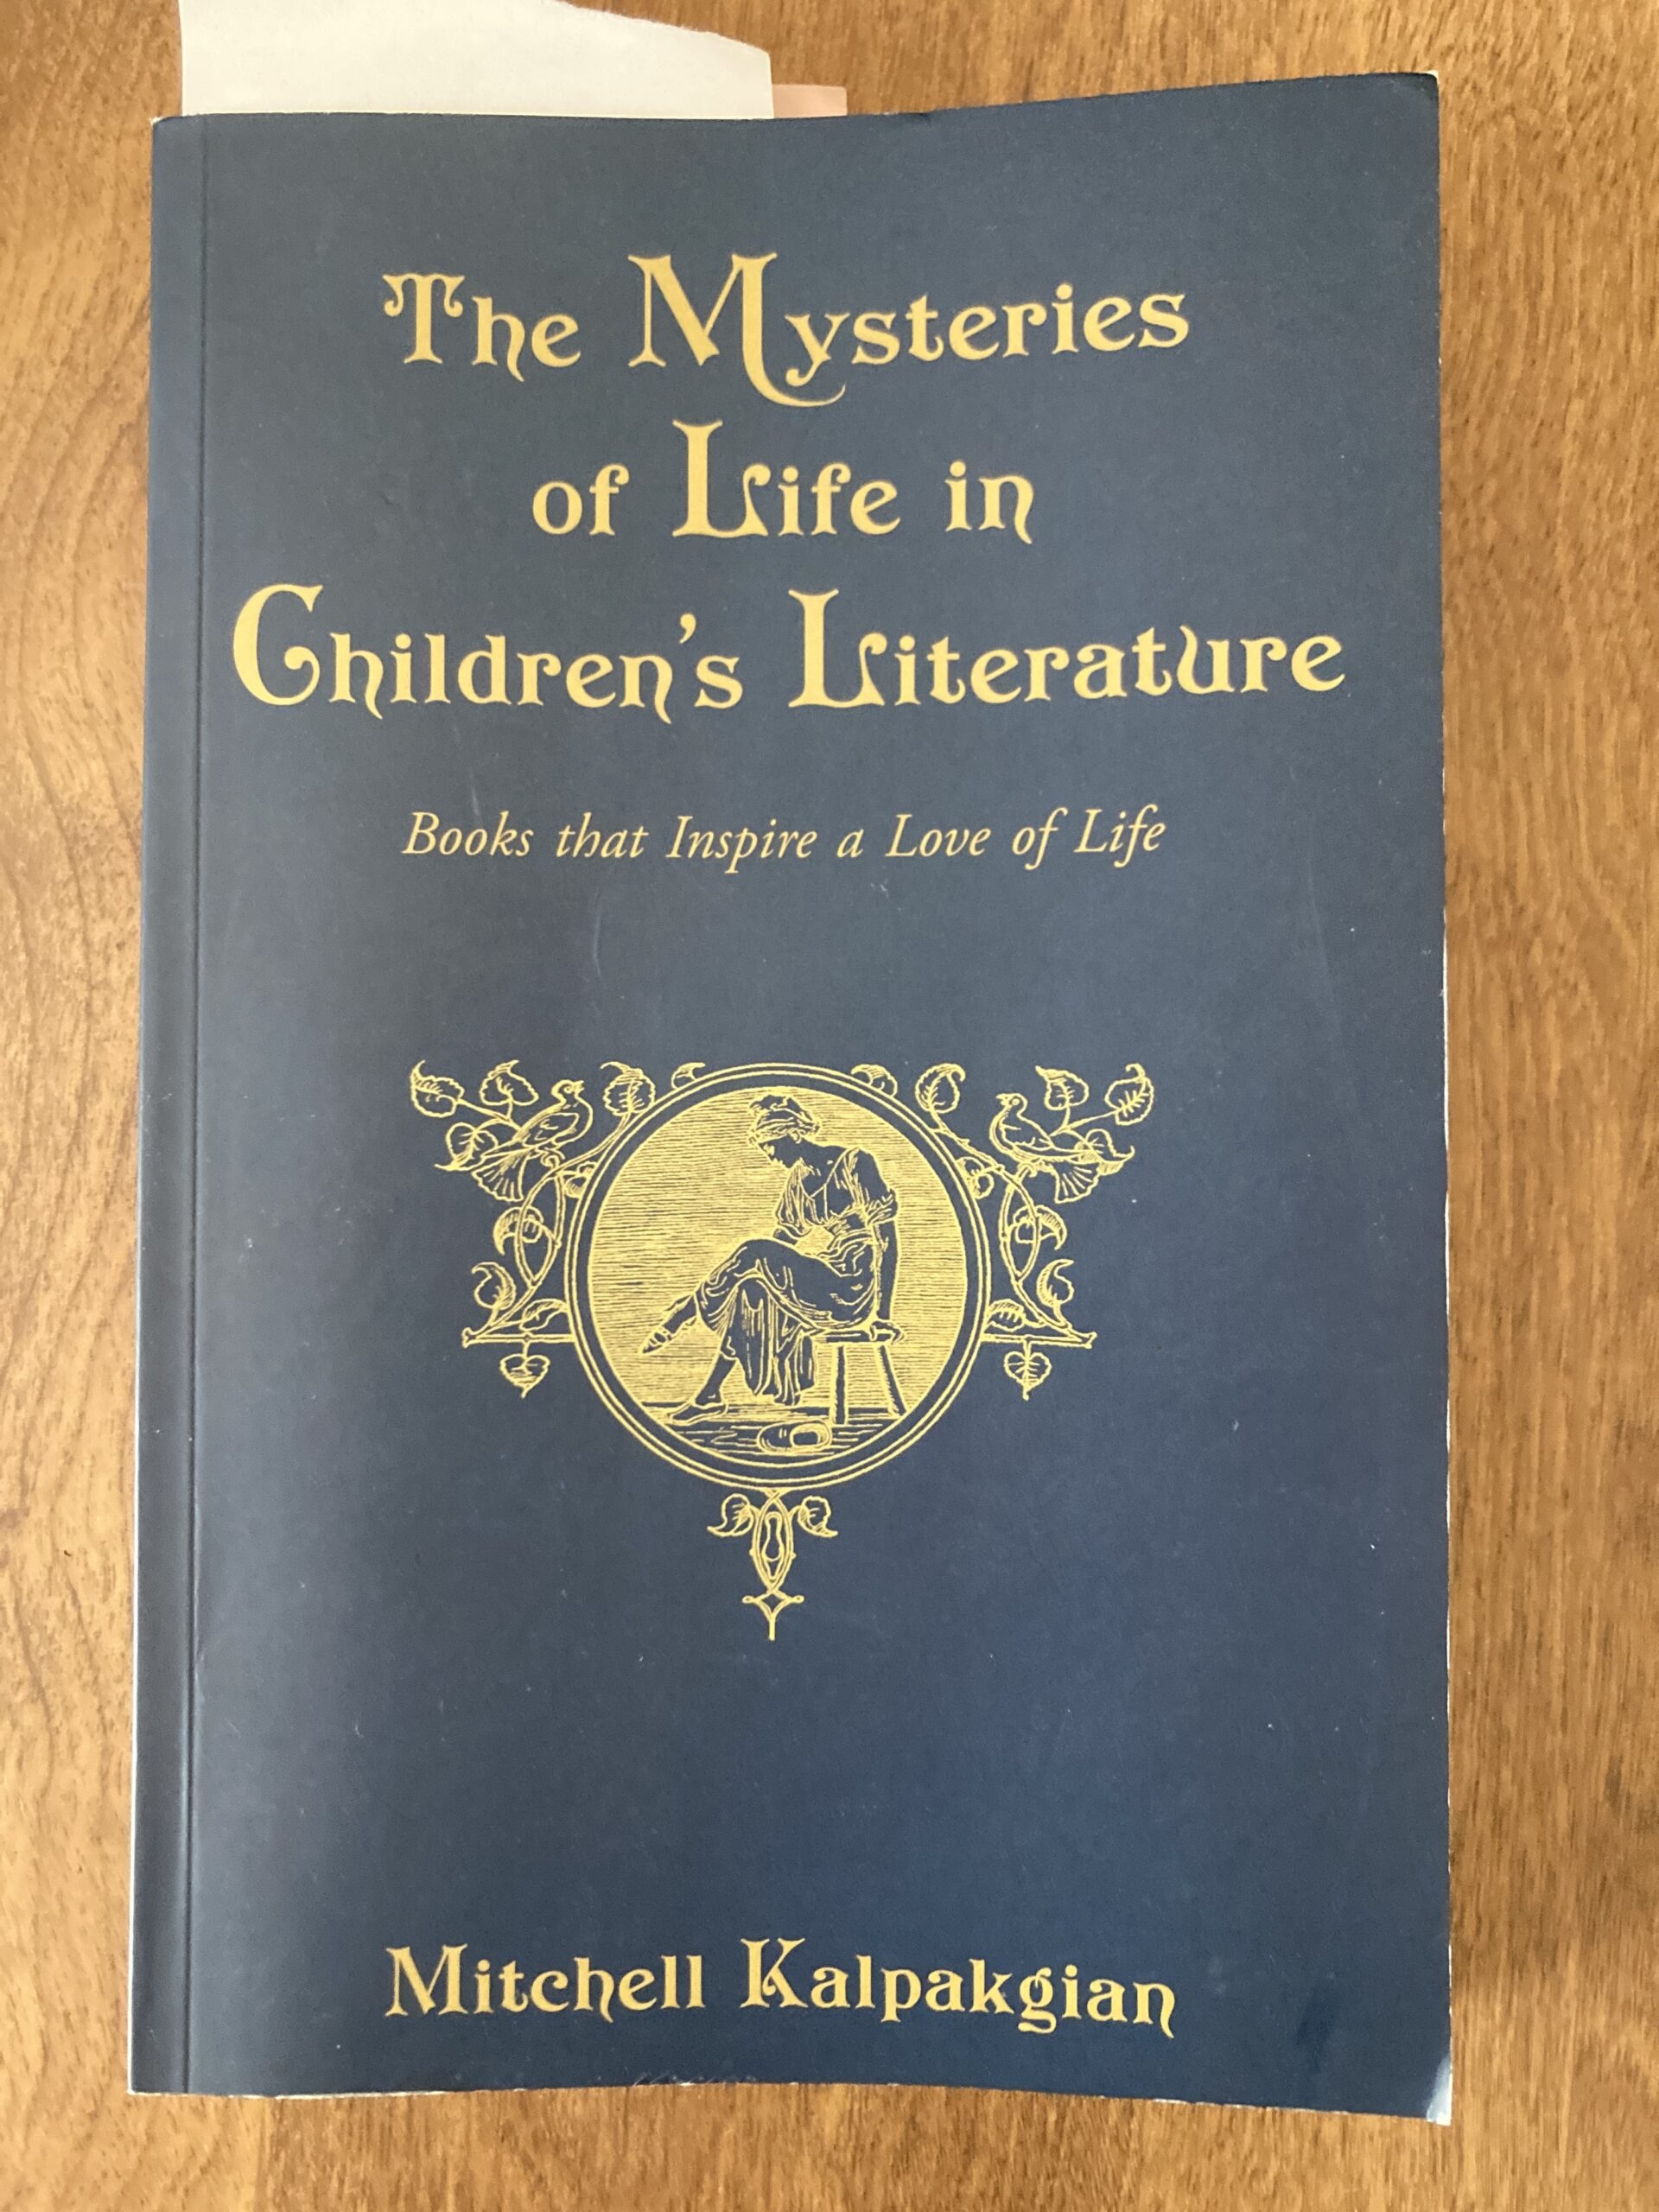 The Mysteries of Life in Children’s Literature